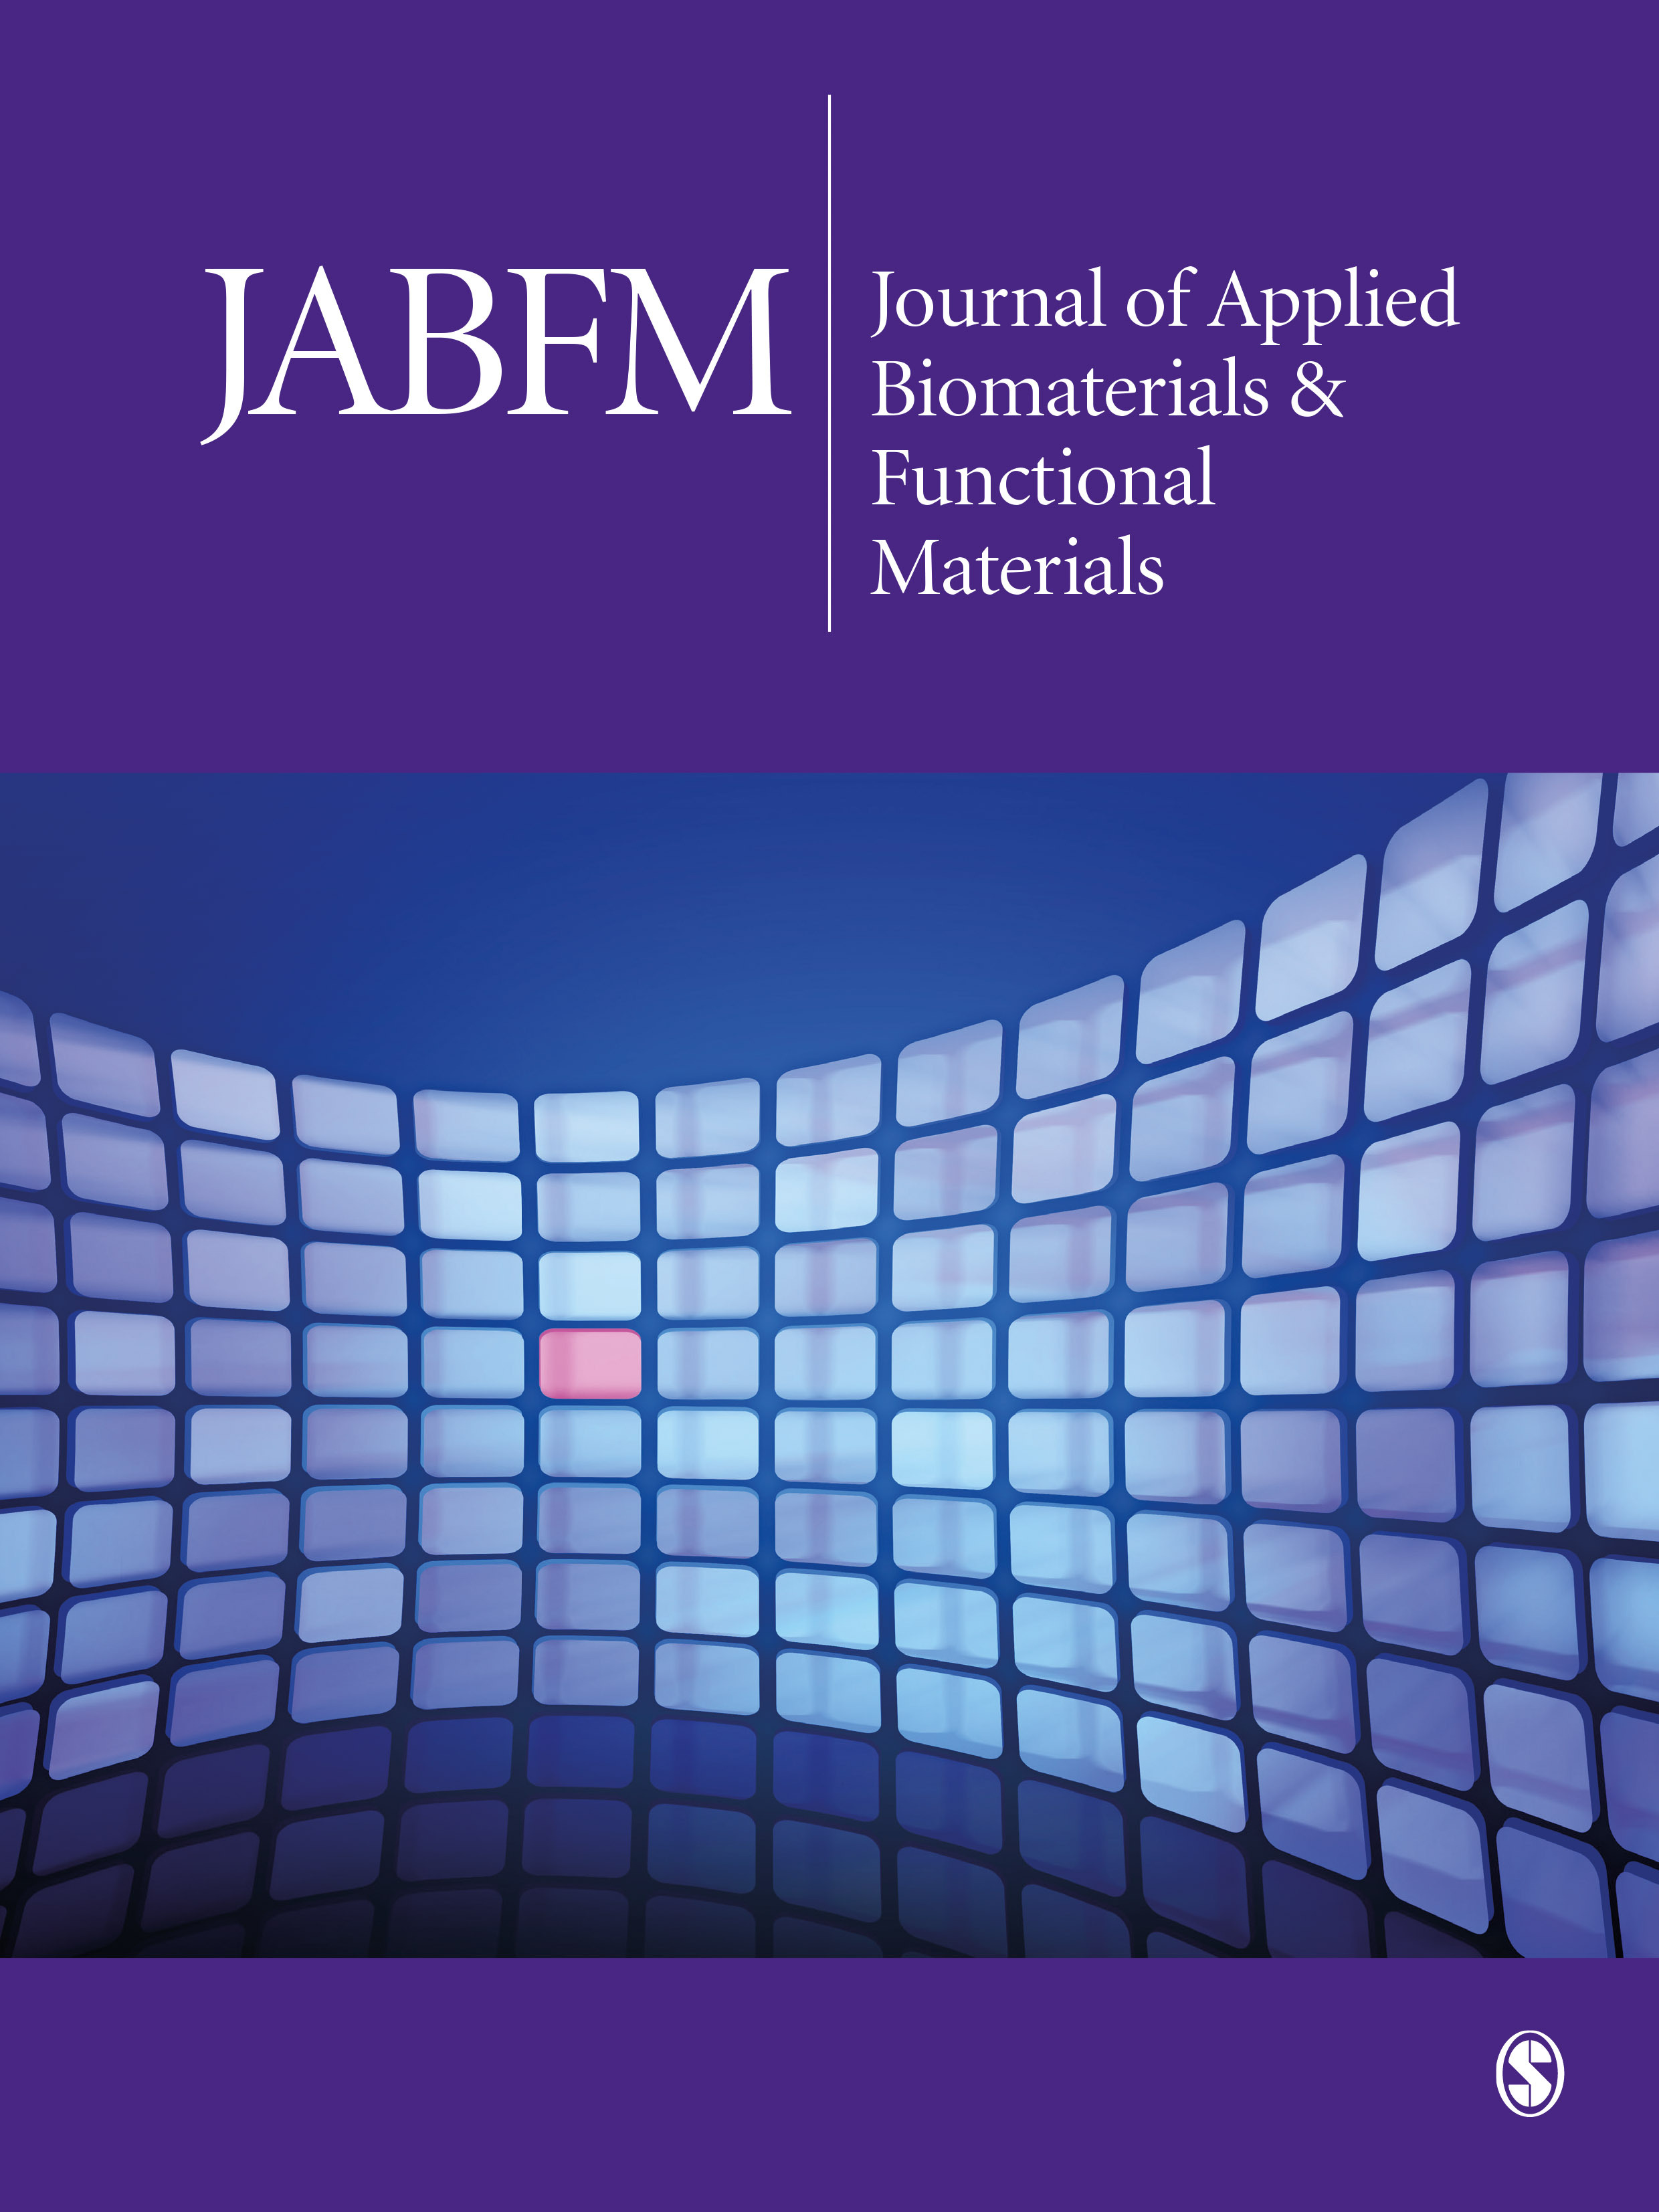 Journal of Applied Biomaterials & Functional Materials